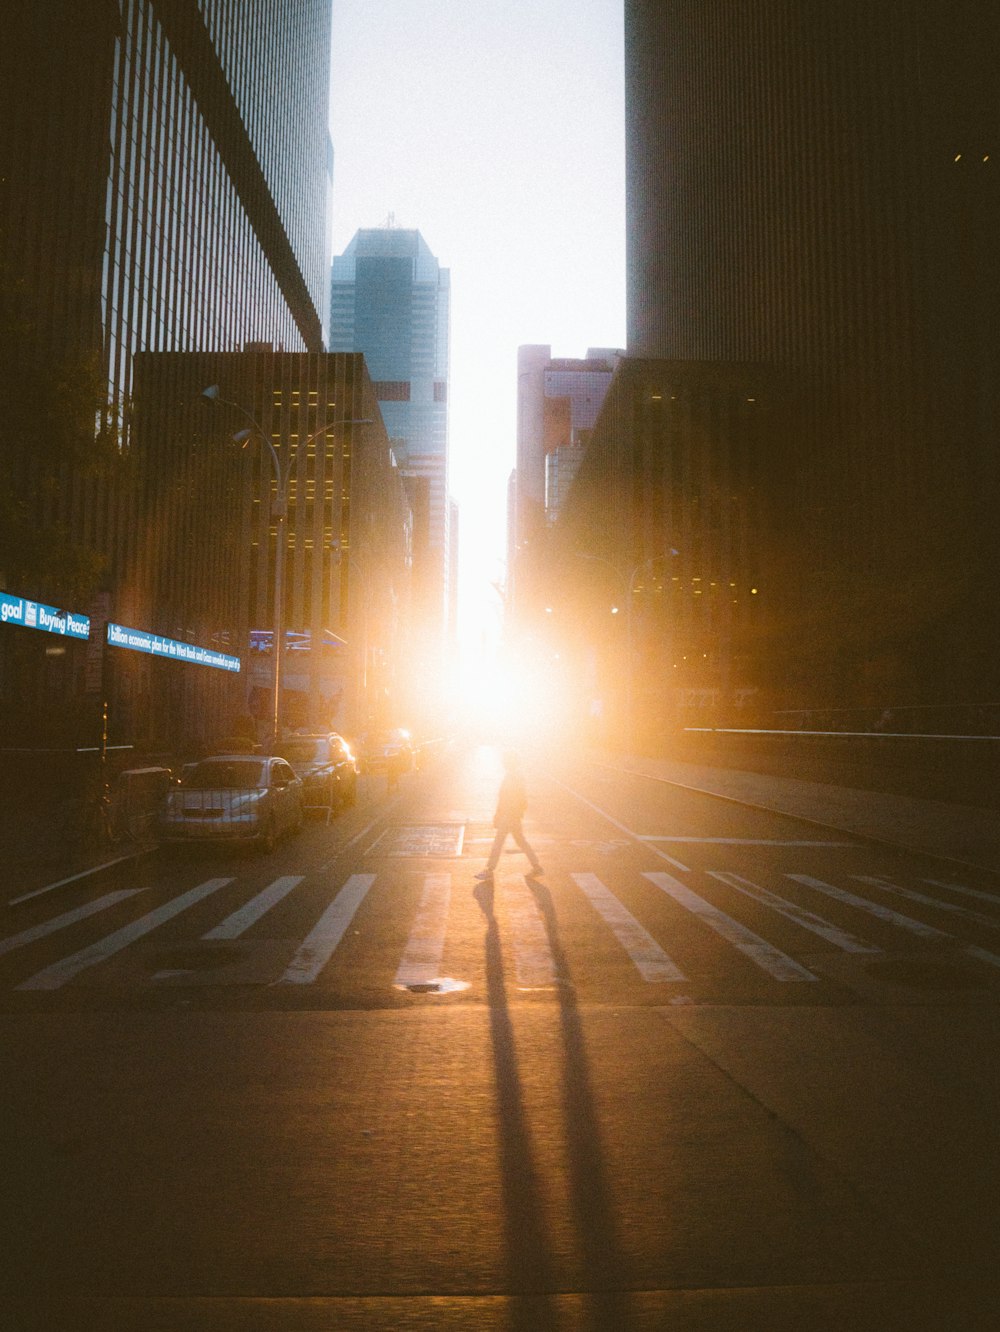 a person walking across a street at sunset